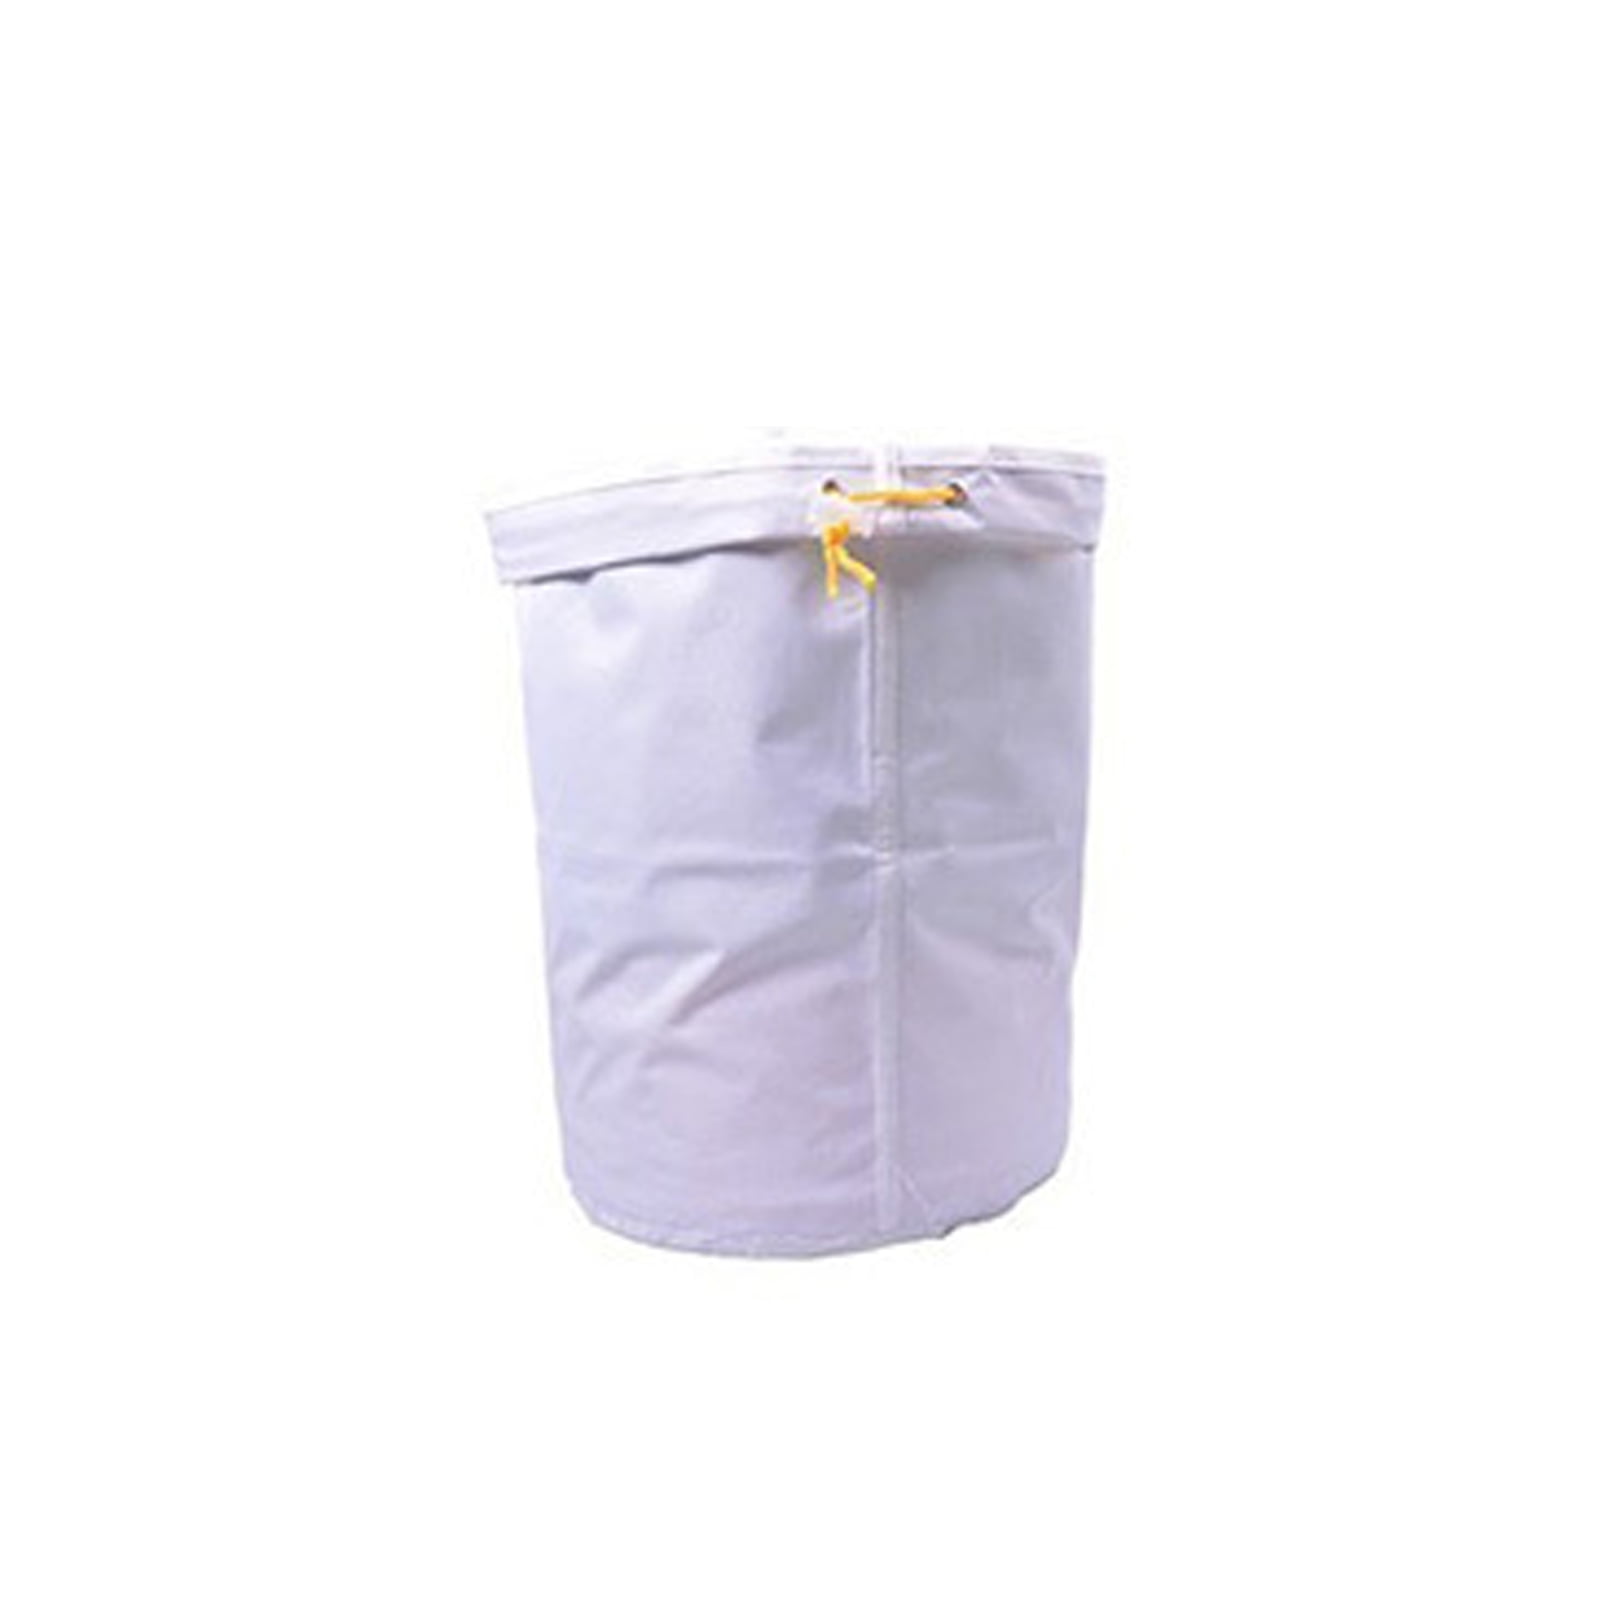 5 GALLON Filtration Bubble Bag Hydroponic Grow Planting Pouch Extract Filter Bag 